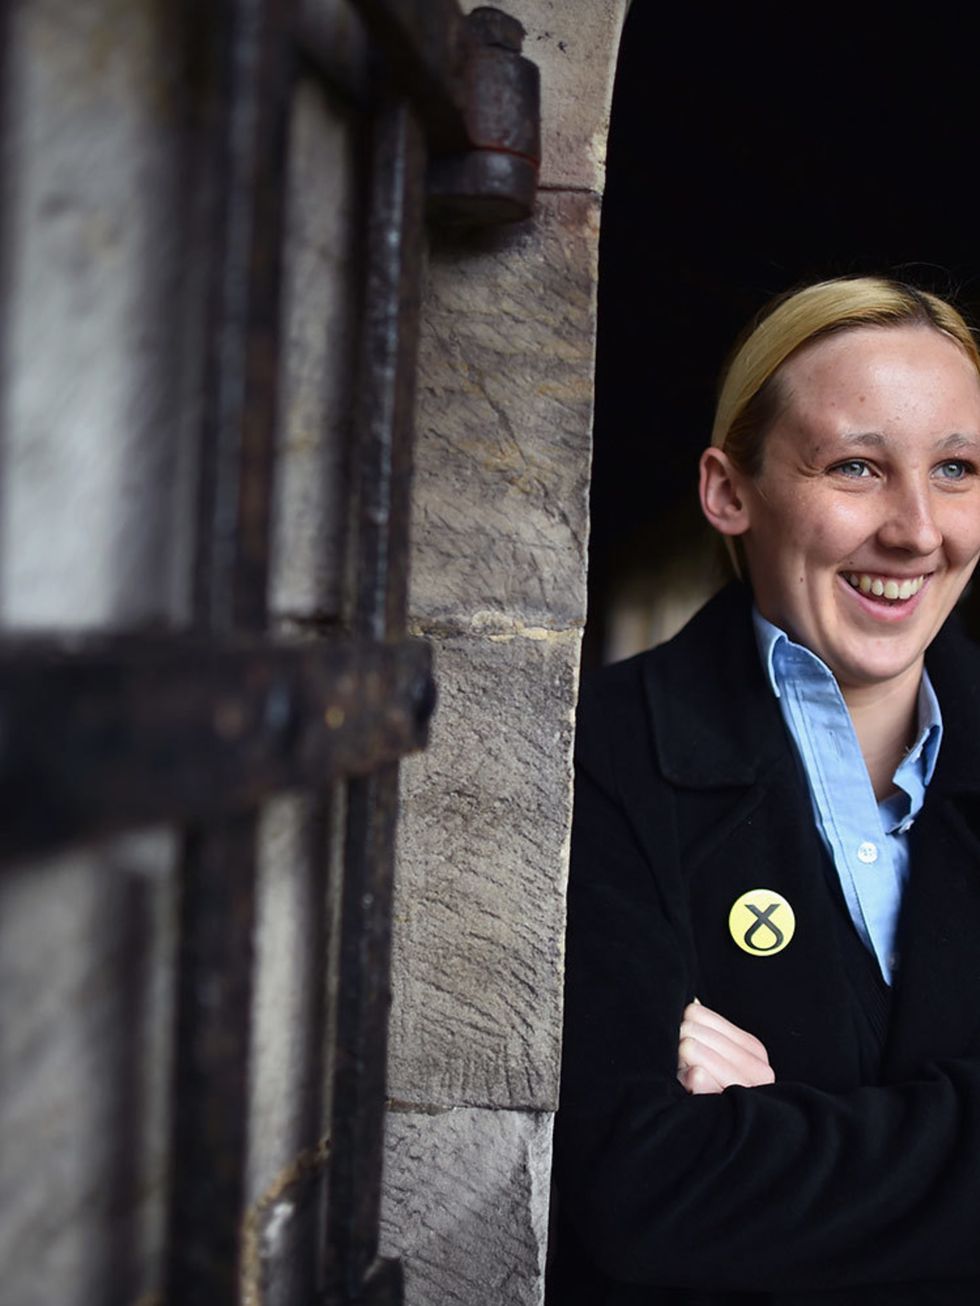 <p>Mhairi Black, 20, <span style="line-height:1.6">MP</span></p>

<p>Mhairi became the youngest MP in 350 years when she beat Labours former shadow foreign secretary Douglas Alexander to the Paisley and Renfrewshire South seat as the Scottish National Pa